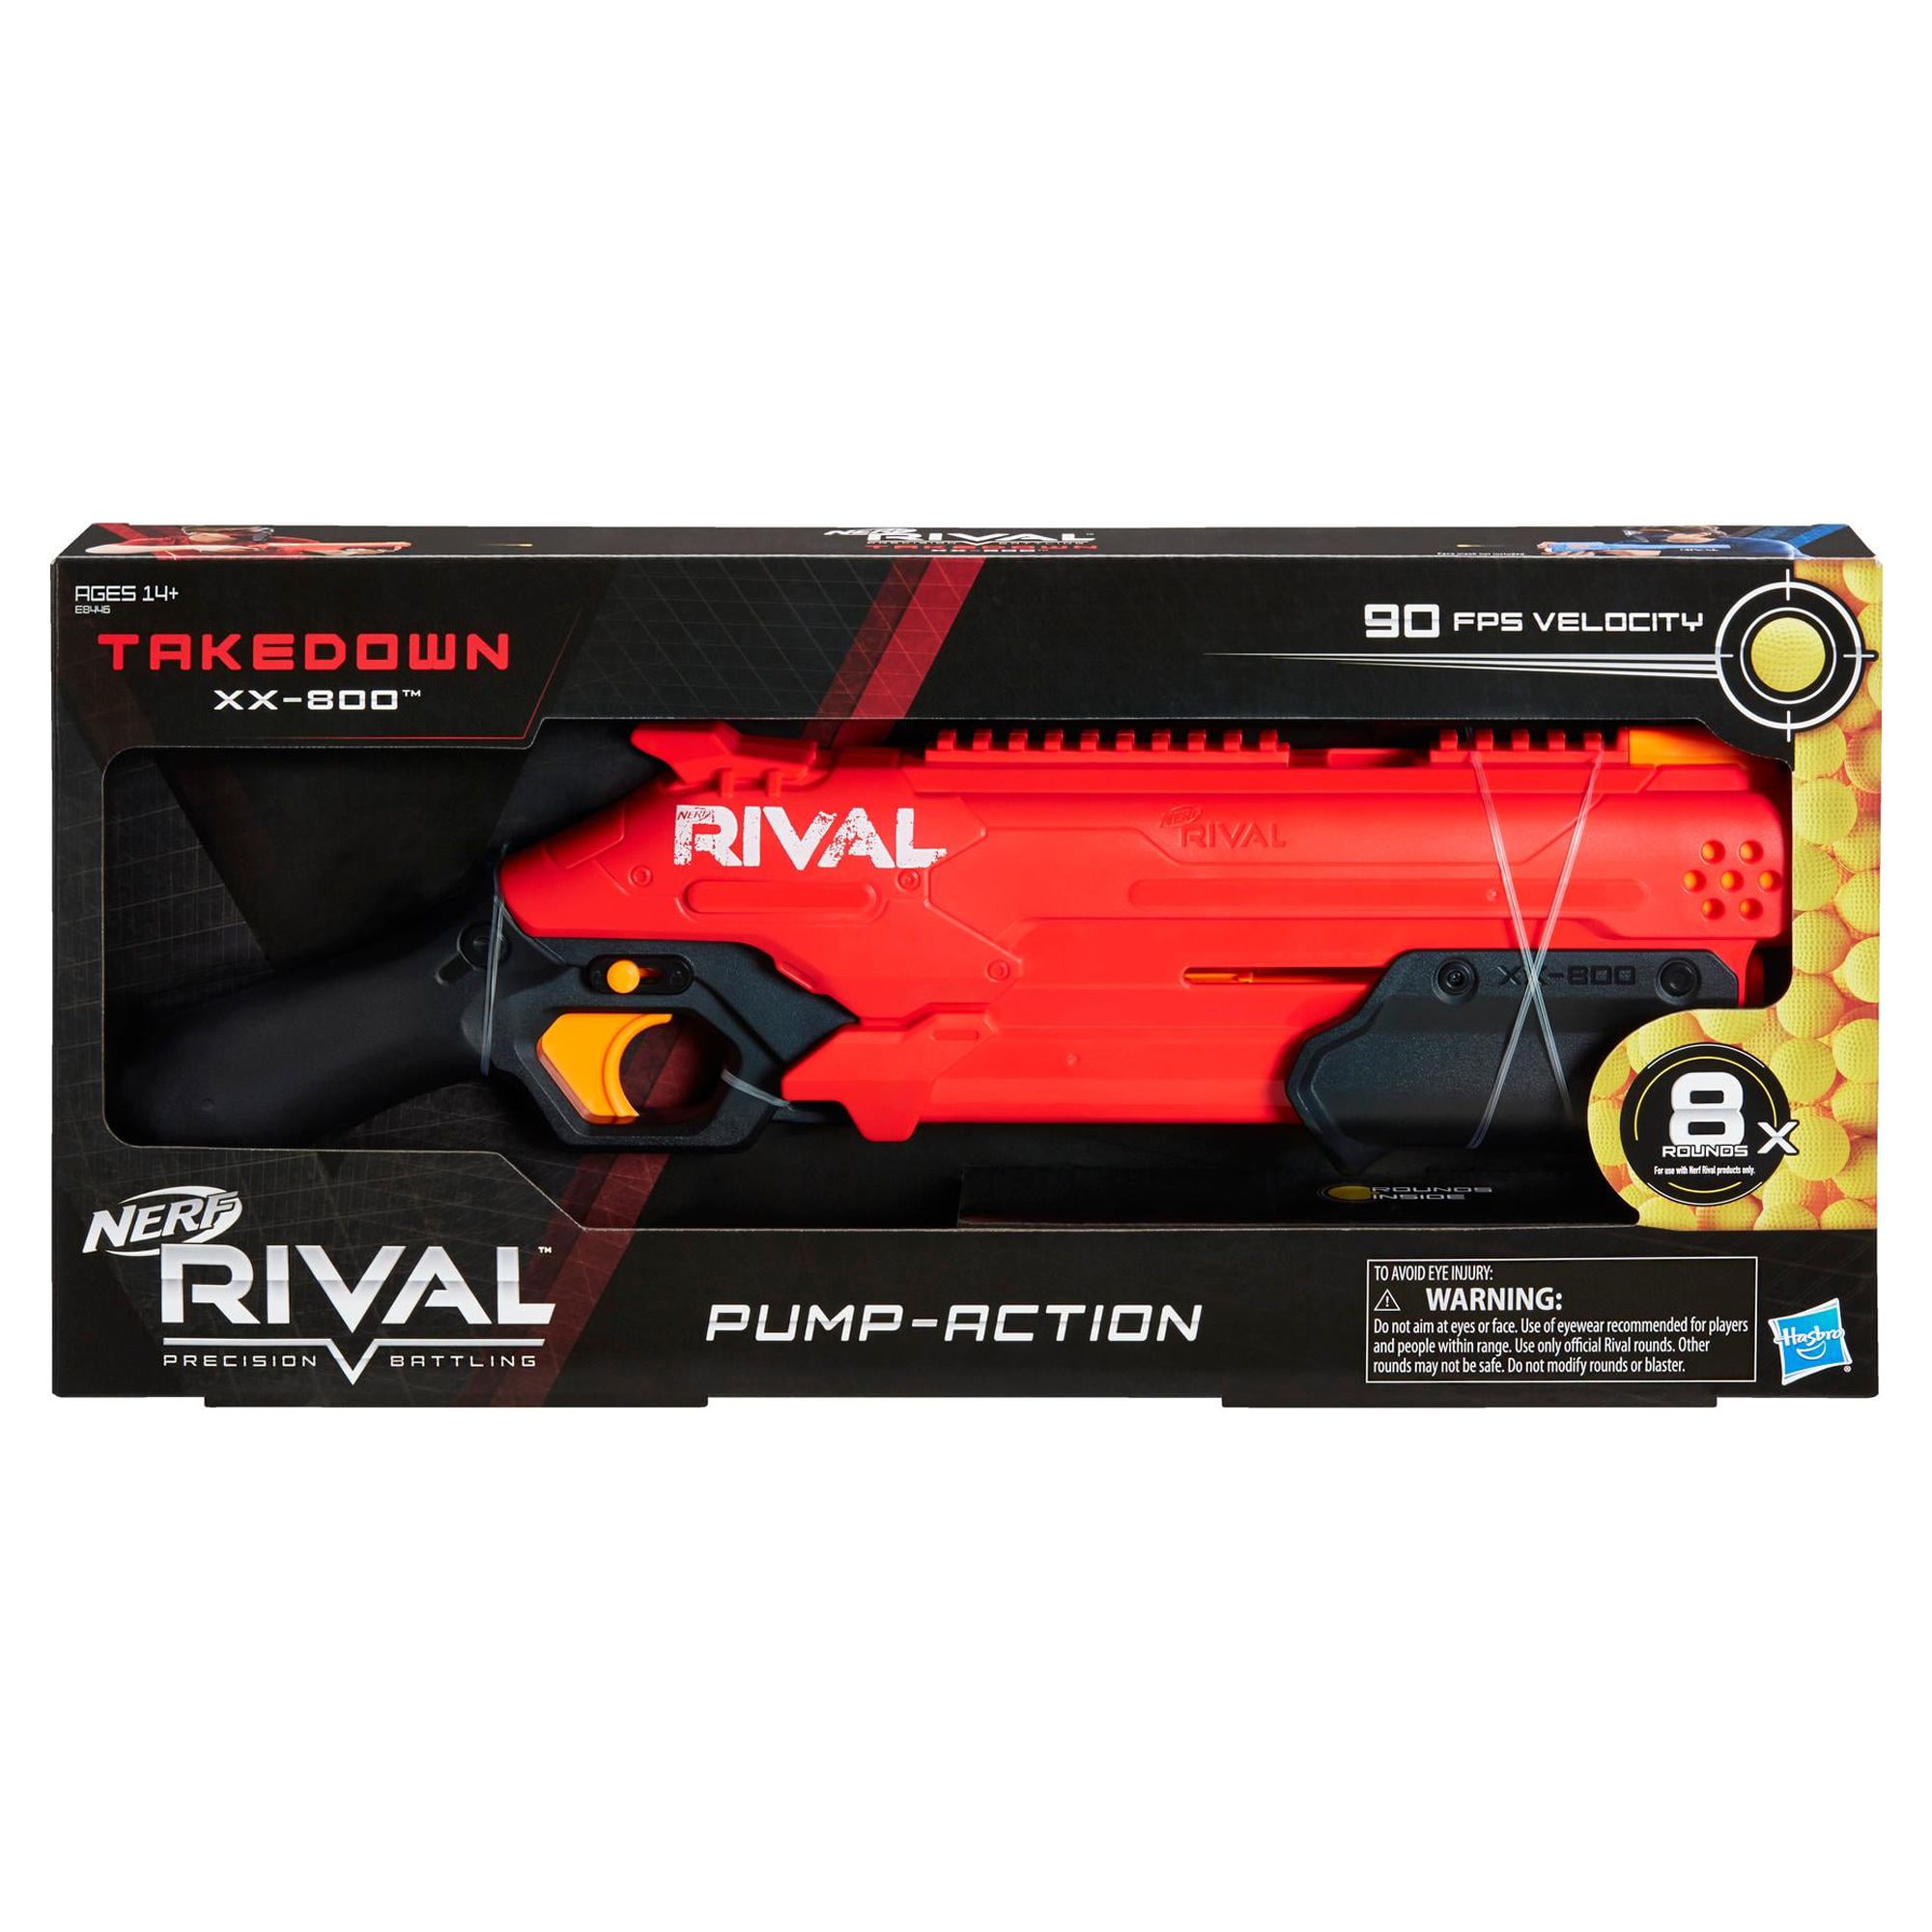 Nerf Rival Takedown XX-800 Blaster -- Pump Action, Breech-Load, 8-Round Capacity, 90 FPS, 8 Nerf Rival Rounds, Team Red - image 3 of 3